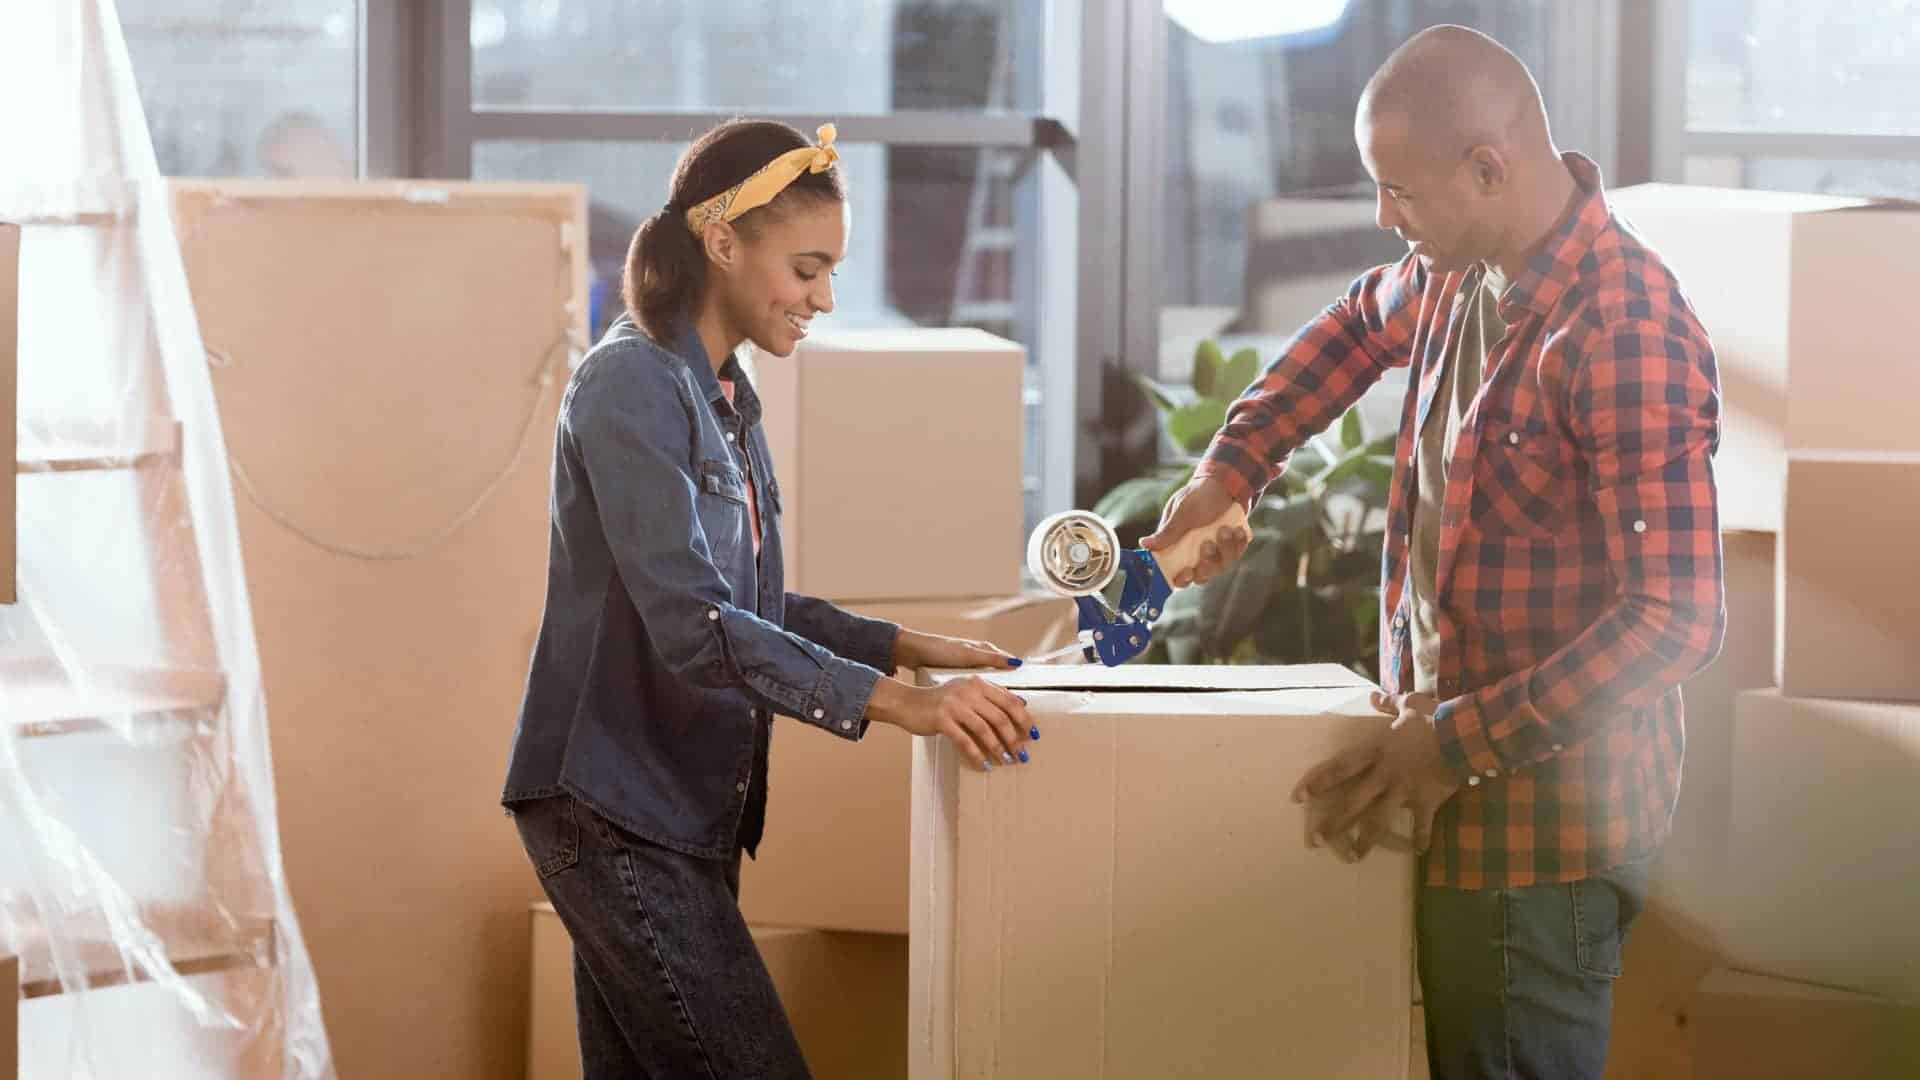 A couple packing boxes together in a brightly lit room. The woman, wearing a denim shirt and yellow headband, holds the box steady while the man, dressed in a red and black plaid shirt, seals it with packing tape. The room is filled with cardboard boxes, indicating a move or relocation.